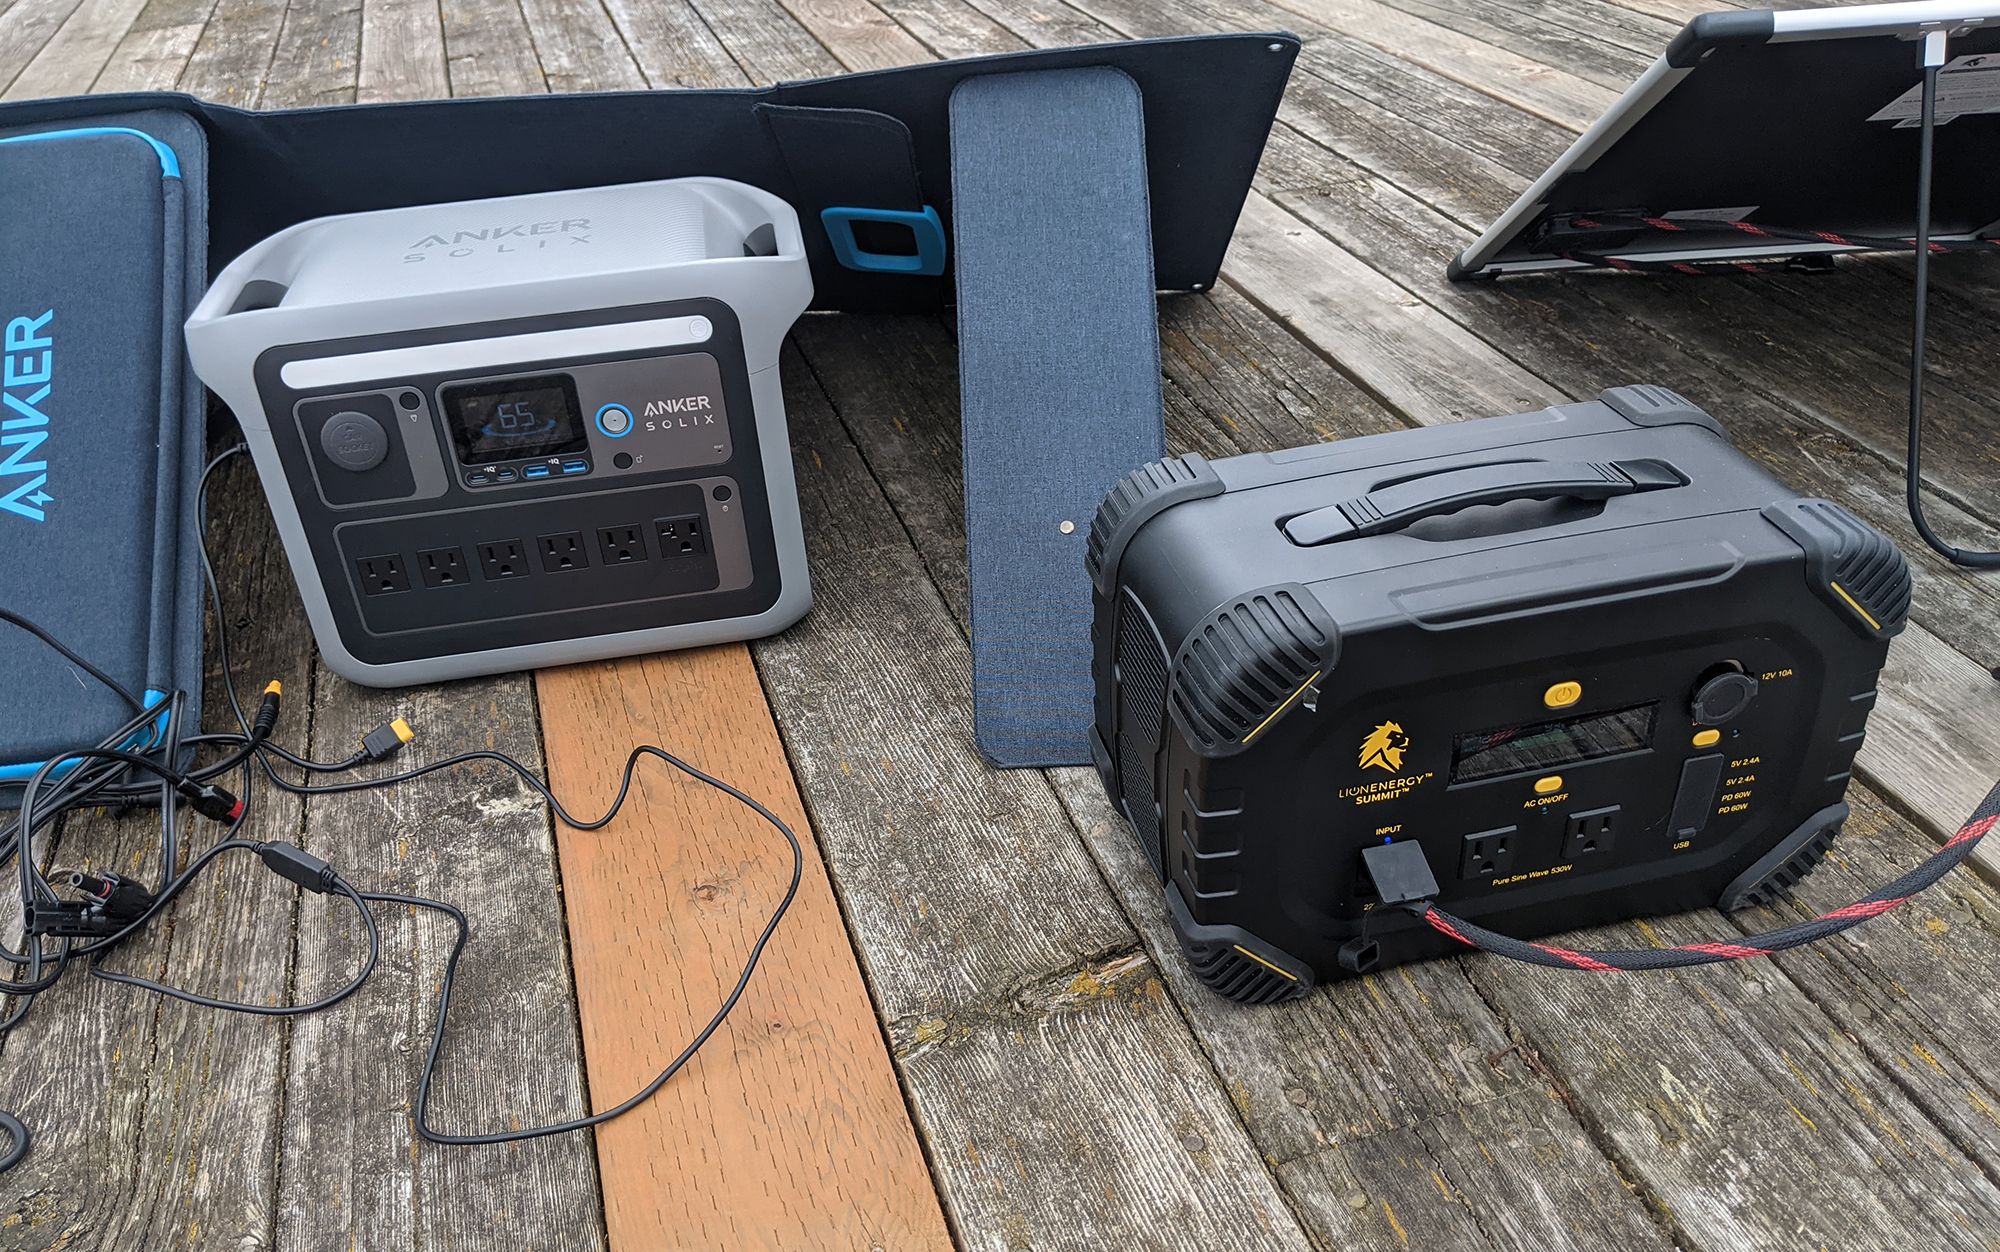 I needed two different power stations to test portable solar panels from Anker and Lion Energy, because their solar panel connector types made it difficult to mix and match. 